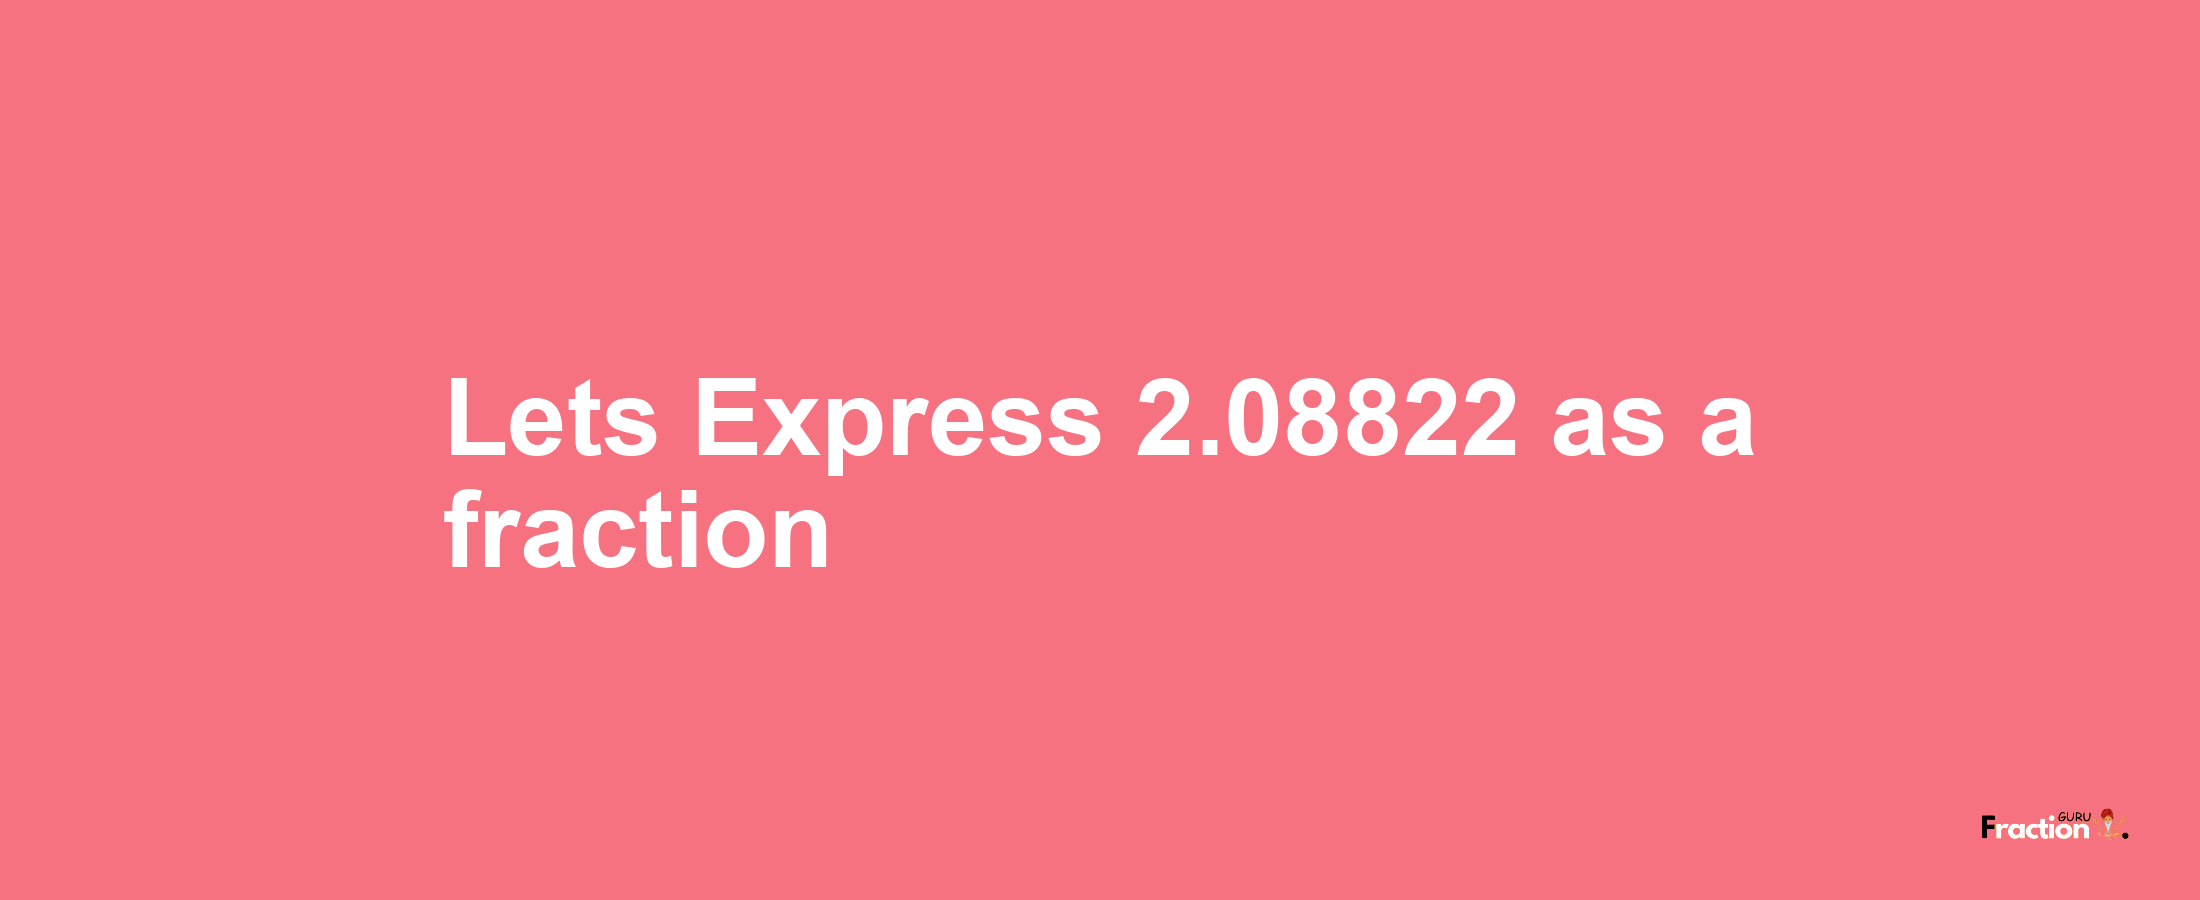 Lets Express 2.08822 as afraction